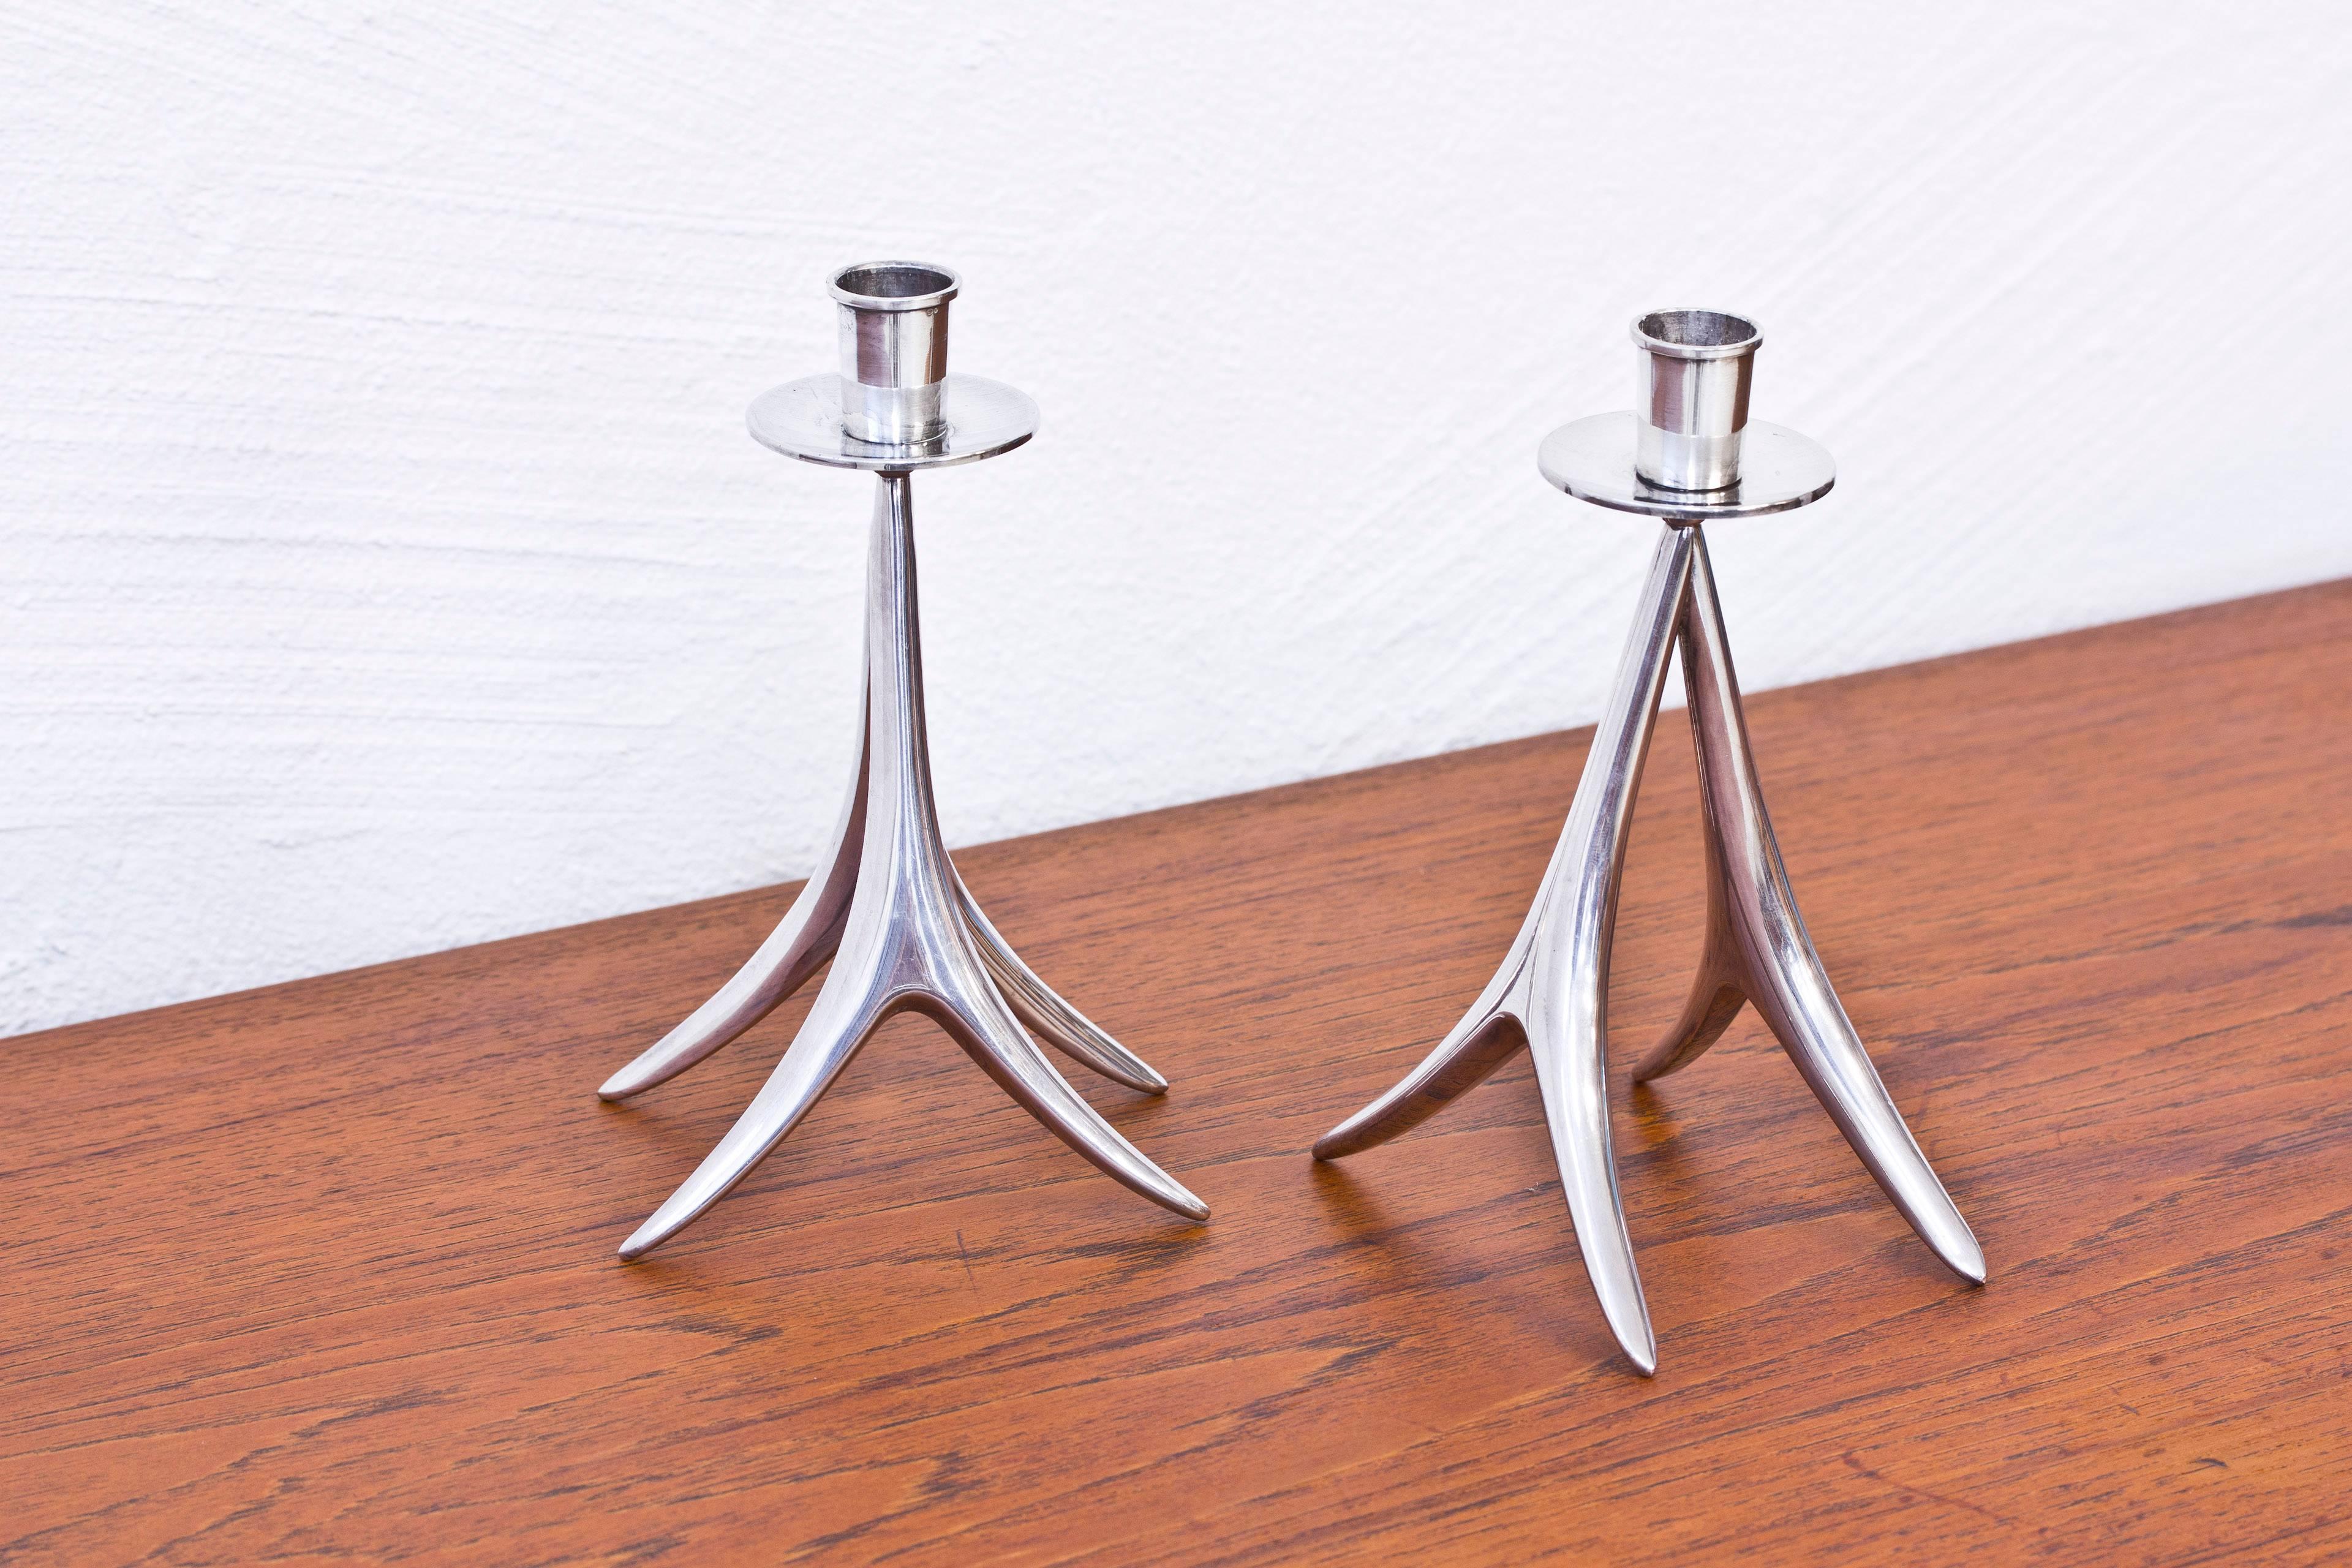 Pair of candle sticks Designed by Anna Greta Eker. Produced by hand in Åbo, Finland in 1972 by Auran Kultaseppä. Very good condition with light wear and patina. Signed with Anna Greta Ekers hallmark as well as full set of silver hallmarks.

Price